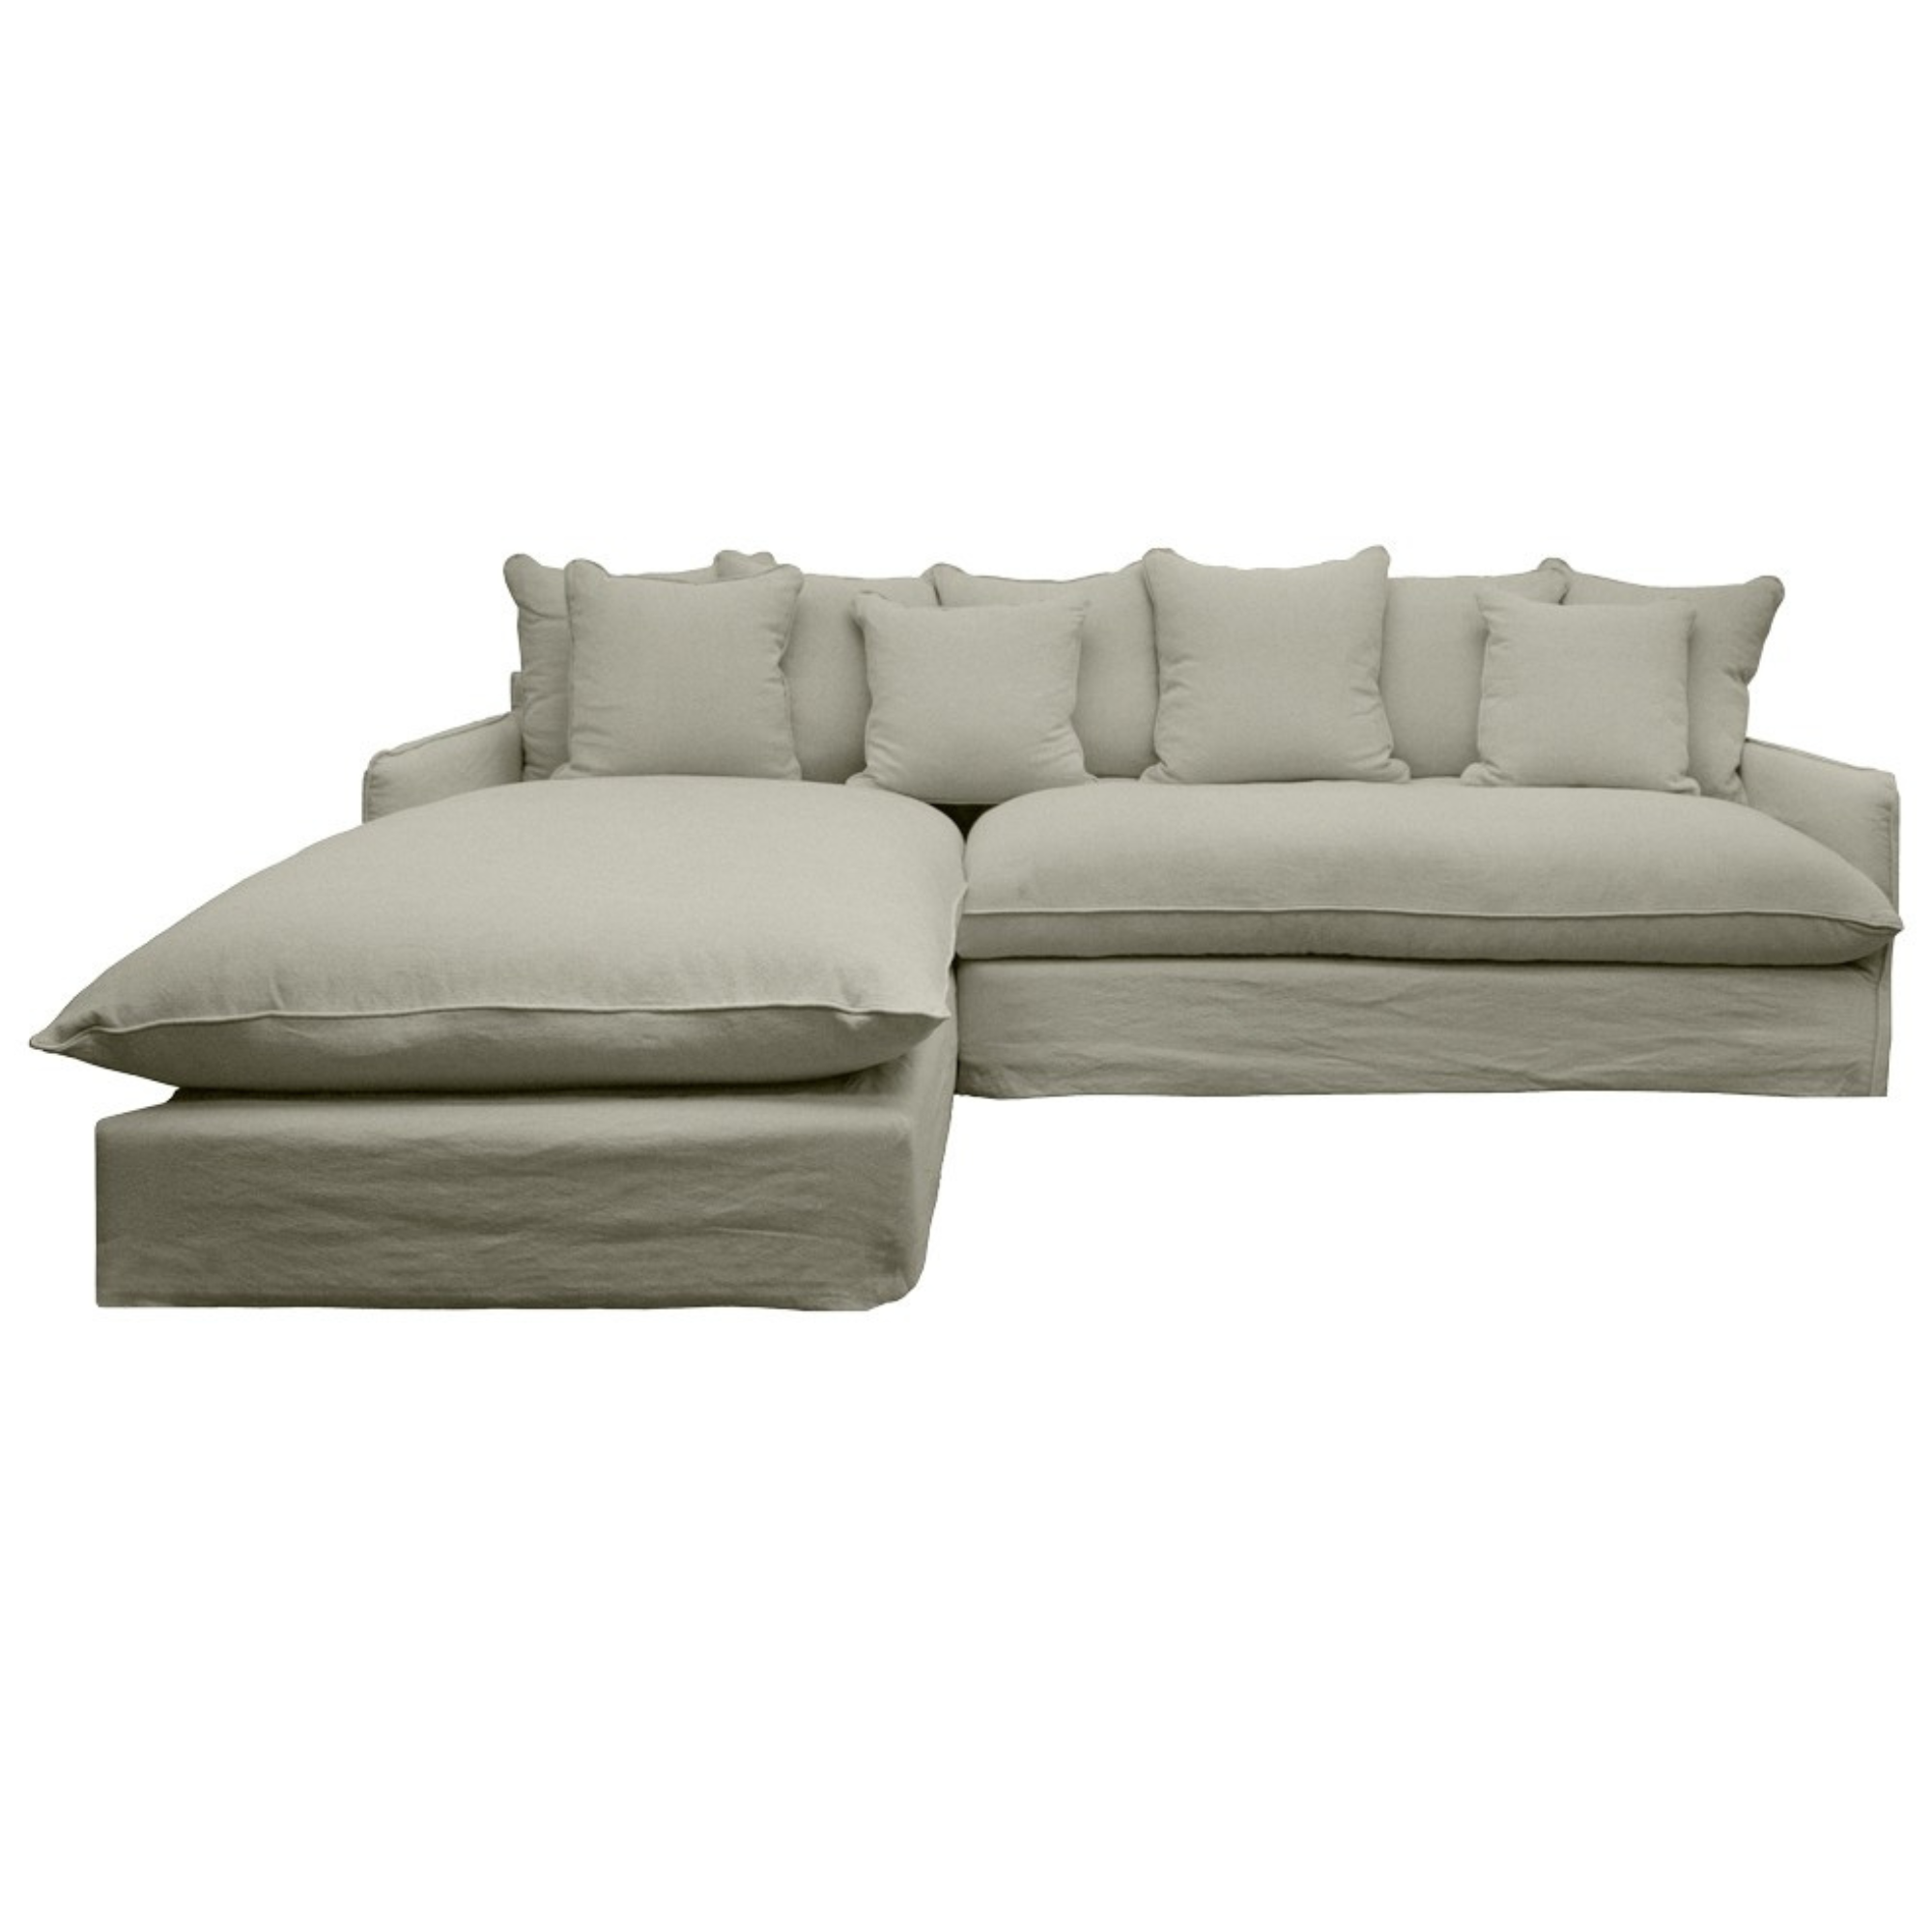 LOTUS SLIPCOVER 2.5 SEATER CHAISE | RIGHT OR LEFT HAND CHAISE